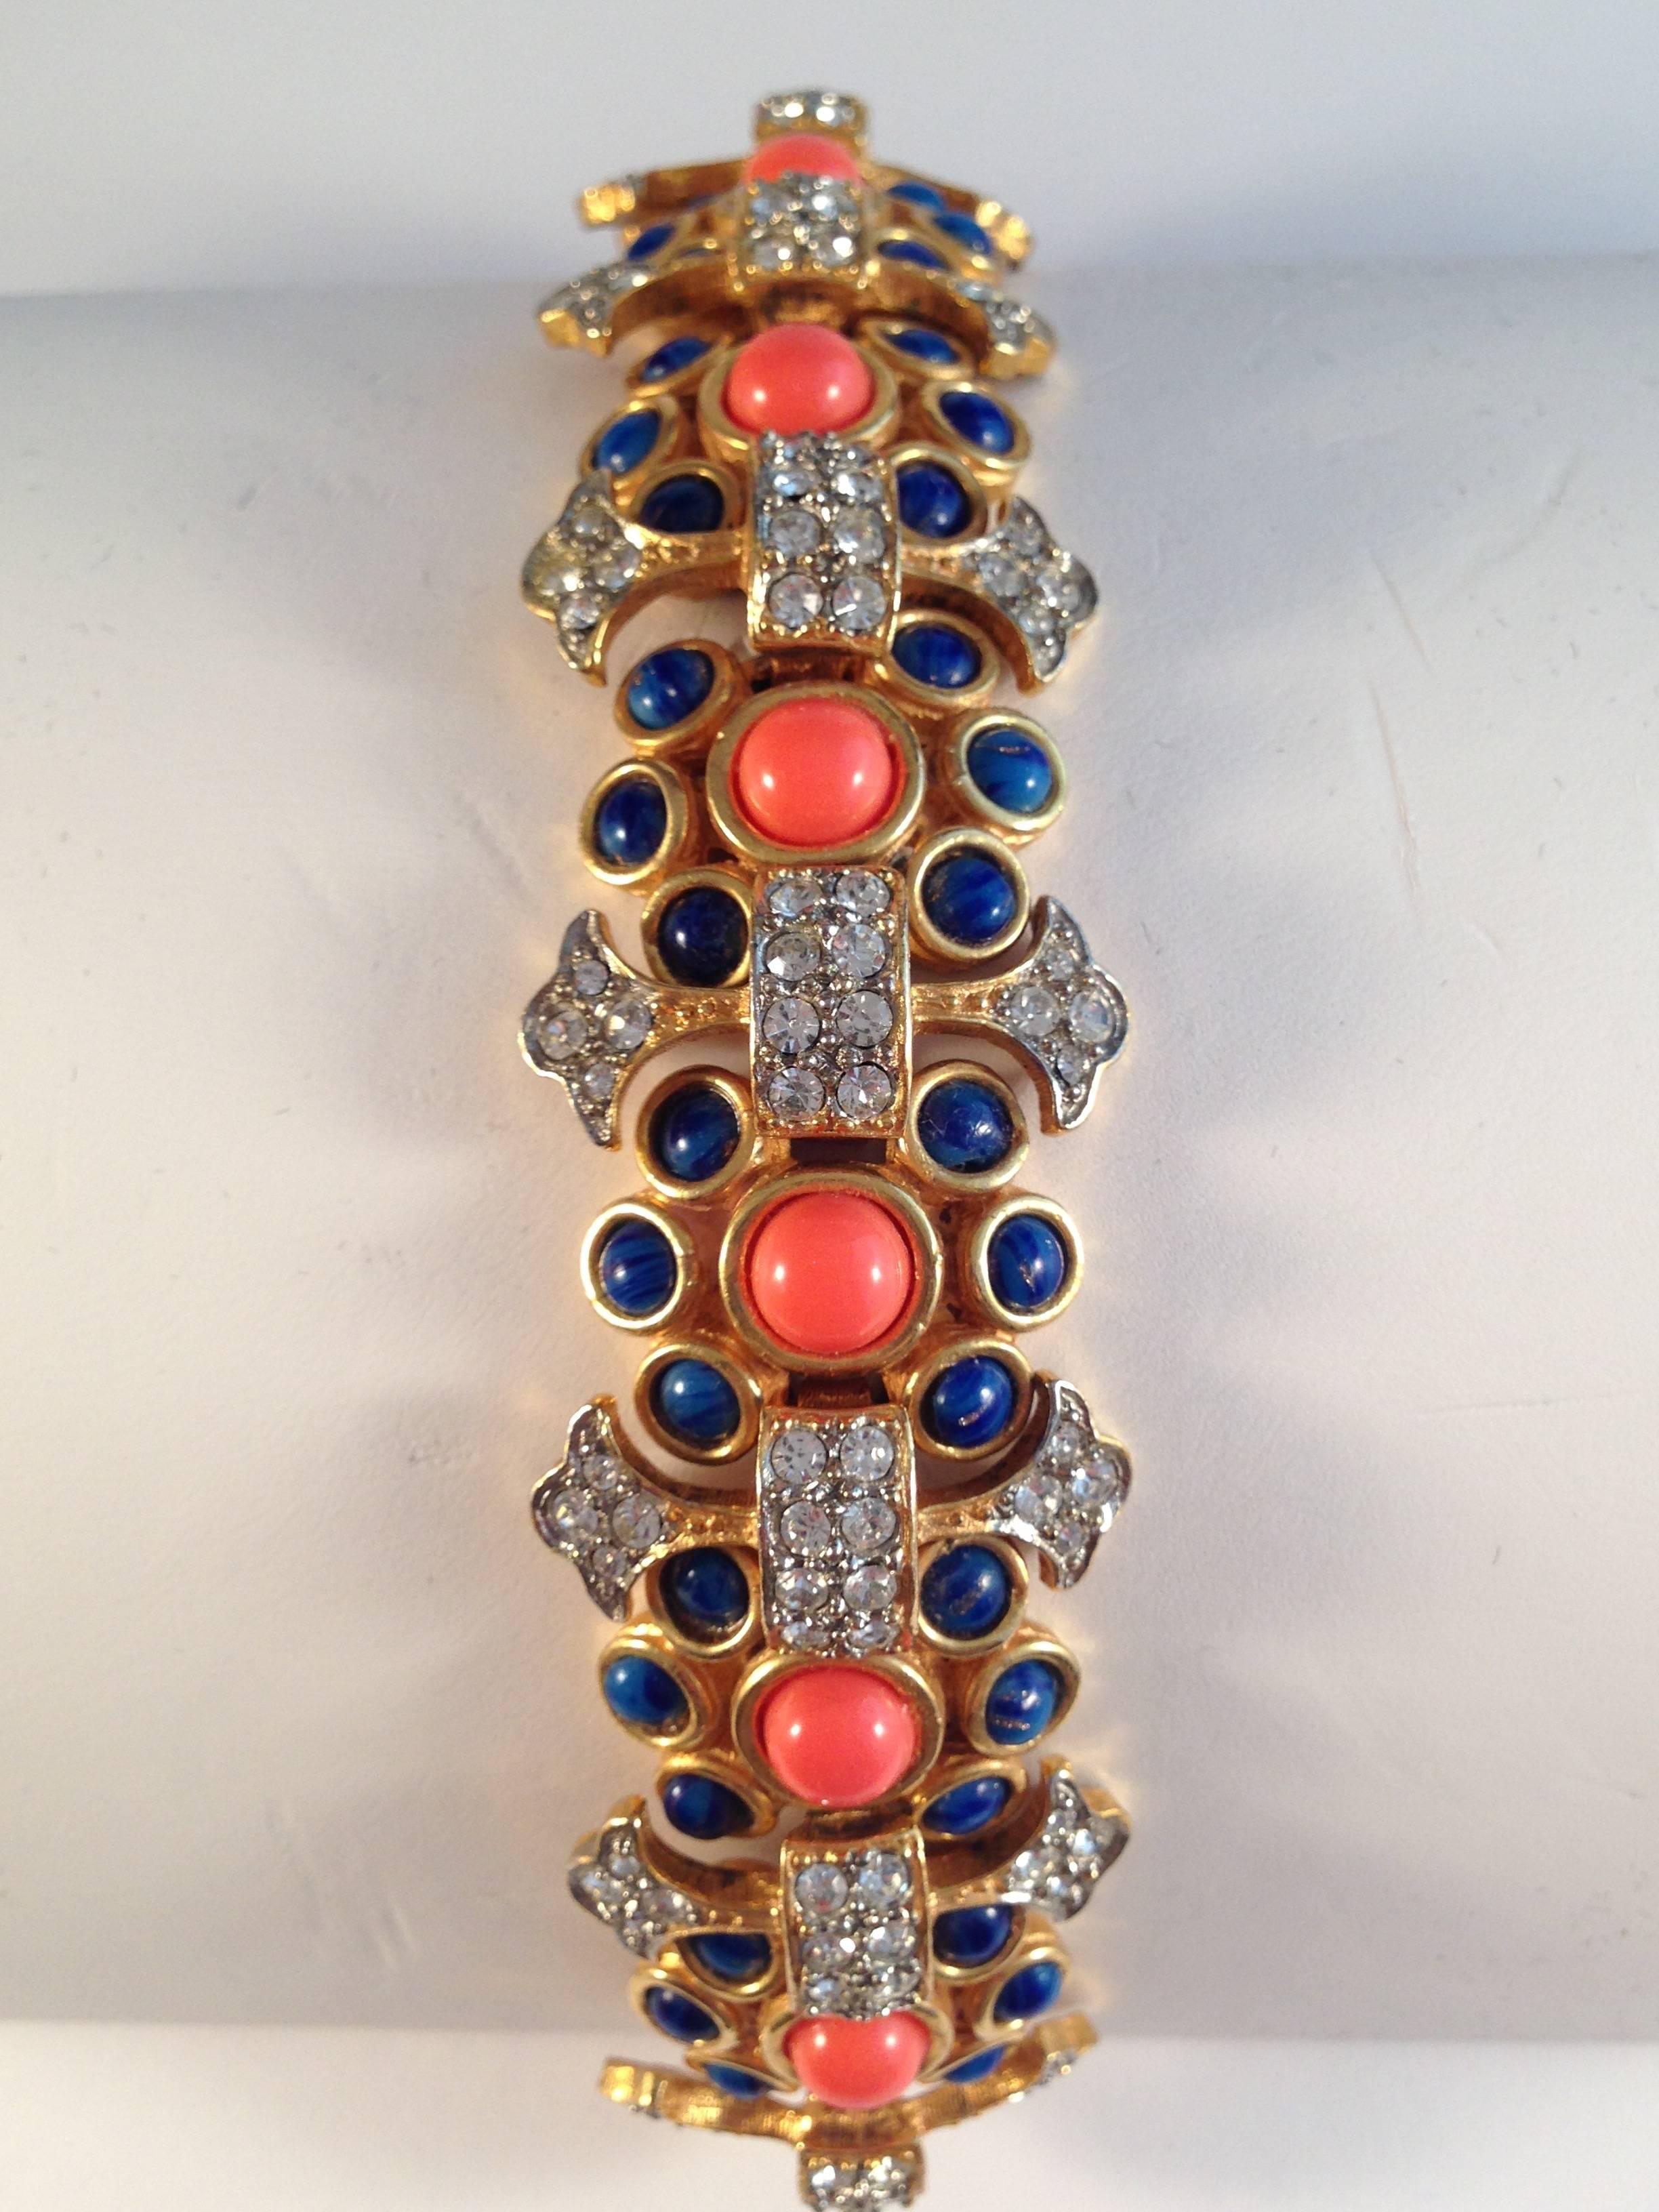 This is an amazing Kenneth Jay Lane Bracelet from the 1960s. It is a beautifully made gold toned link bracelet embellished with faux coral, faux lapis and rhinestones. It has a hidden closure and is signed on the back with 'K.J.L.' - Lane's earliest